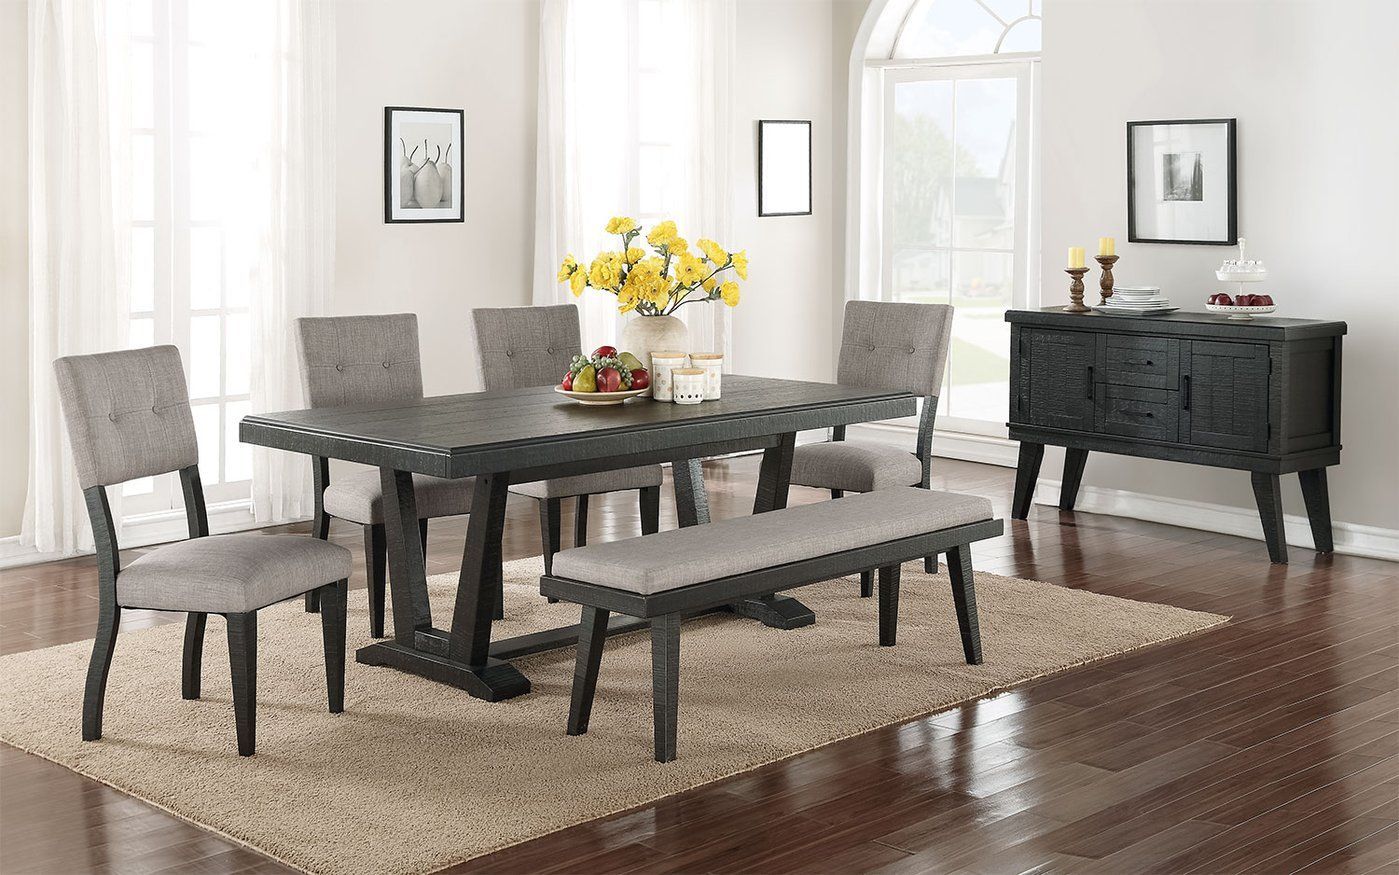 Imari 7 Piece Dining Room Set Black And Grey Black throughout proportions 1399 X 875